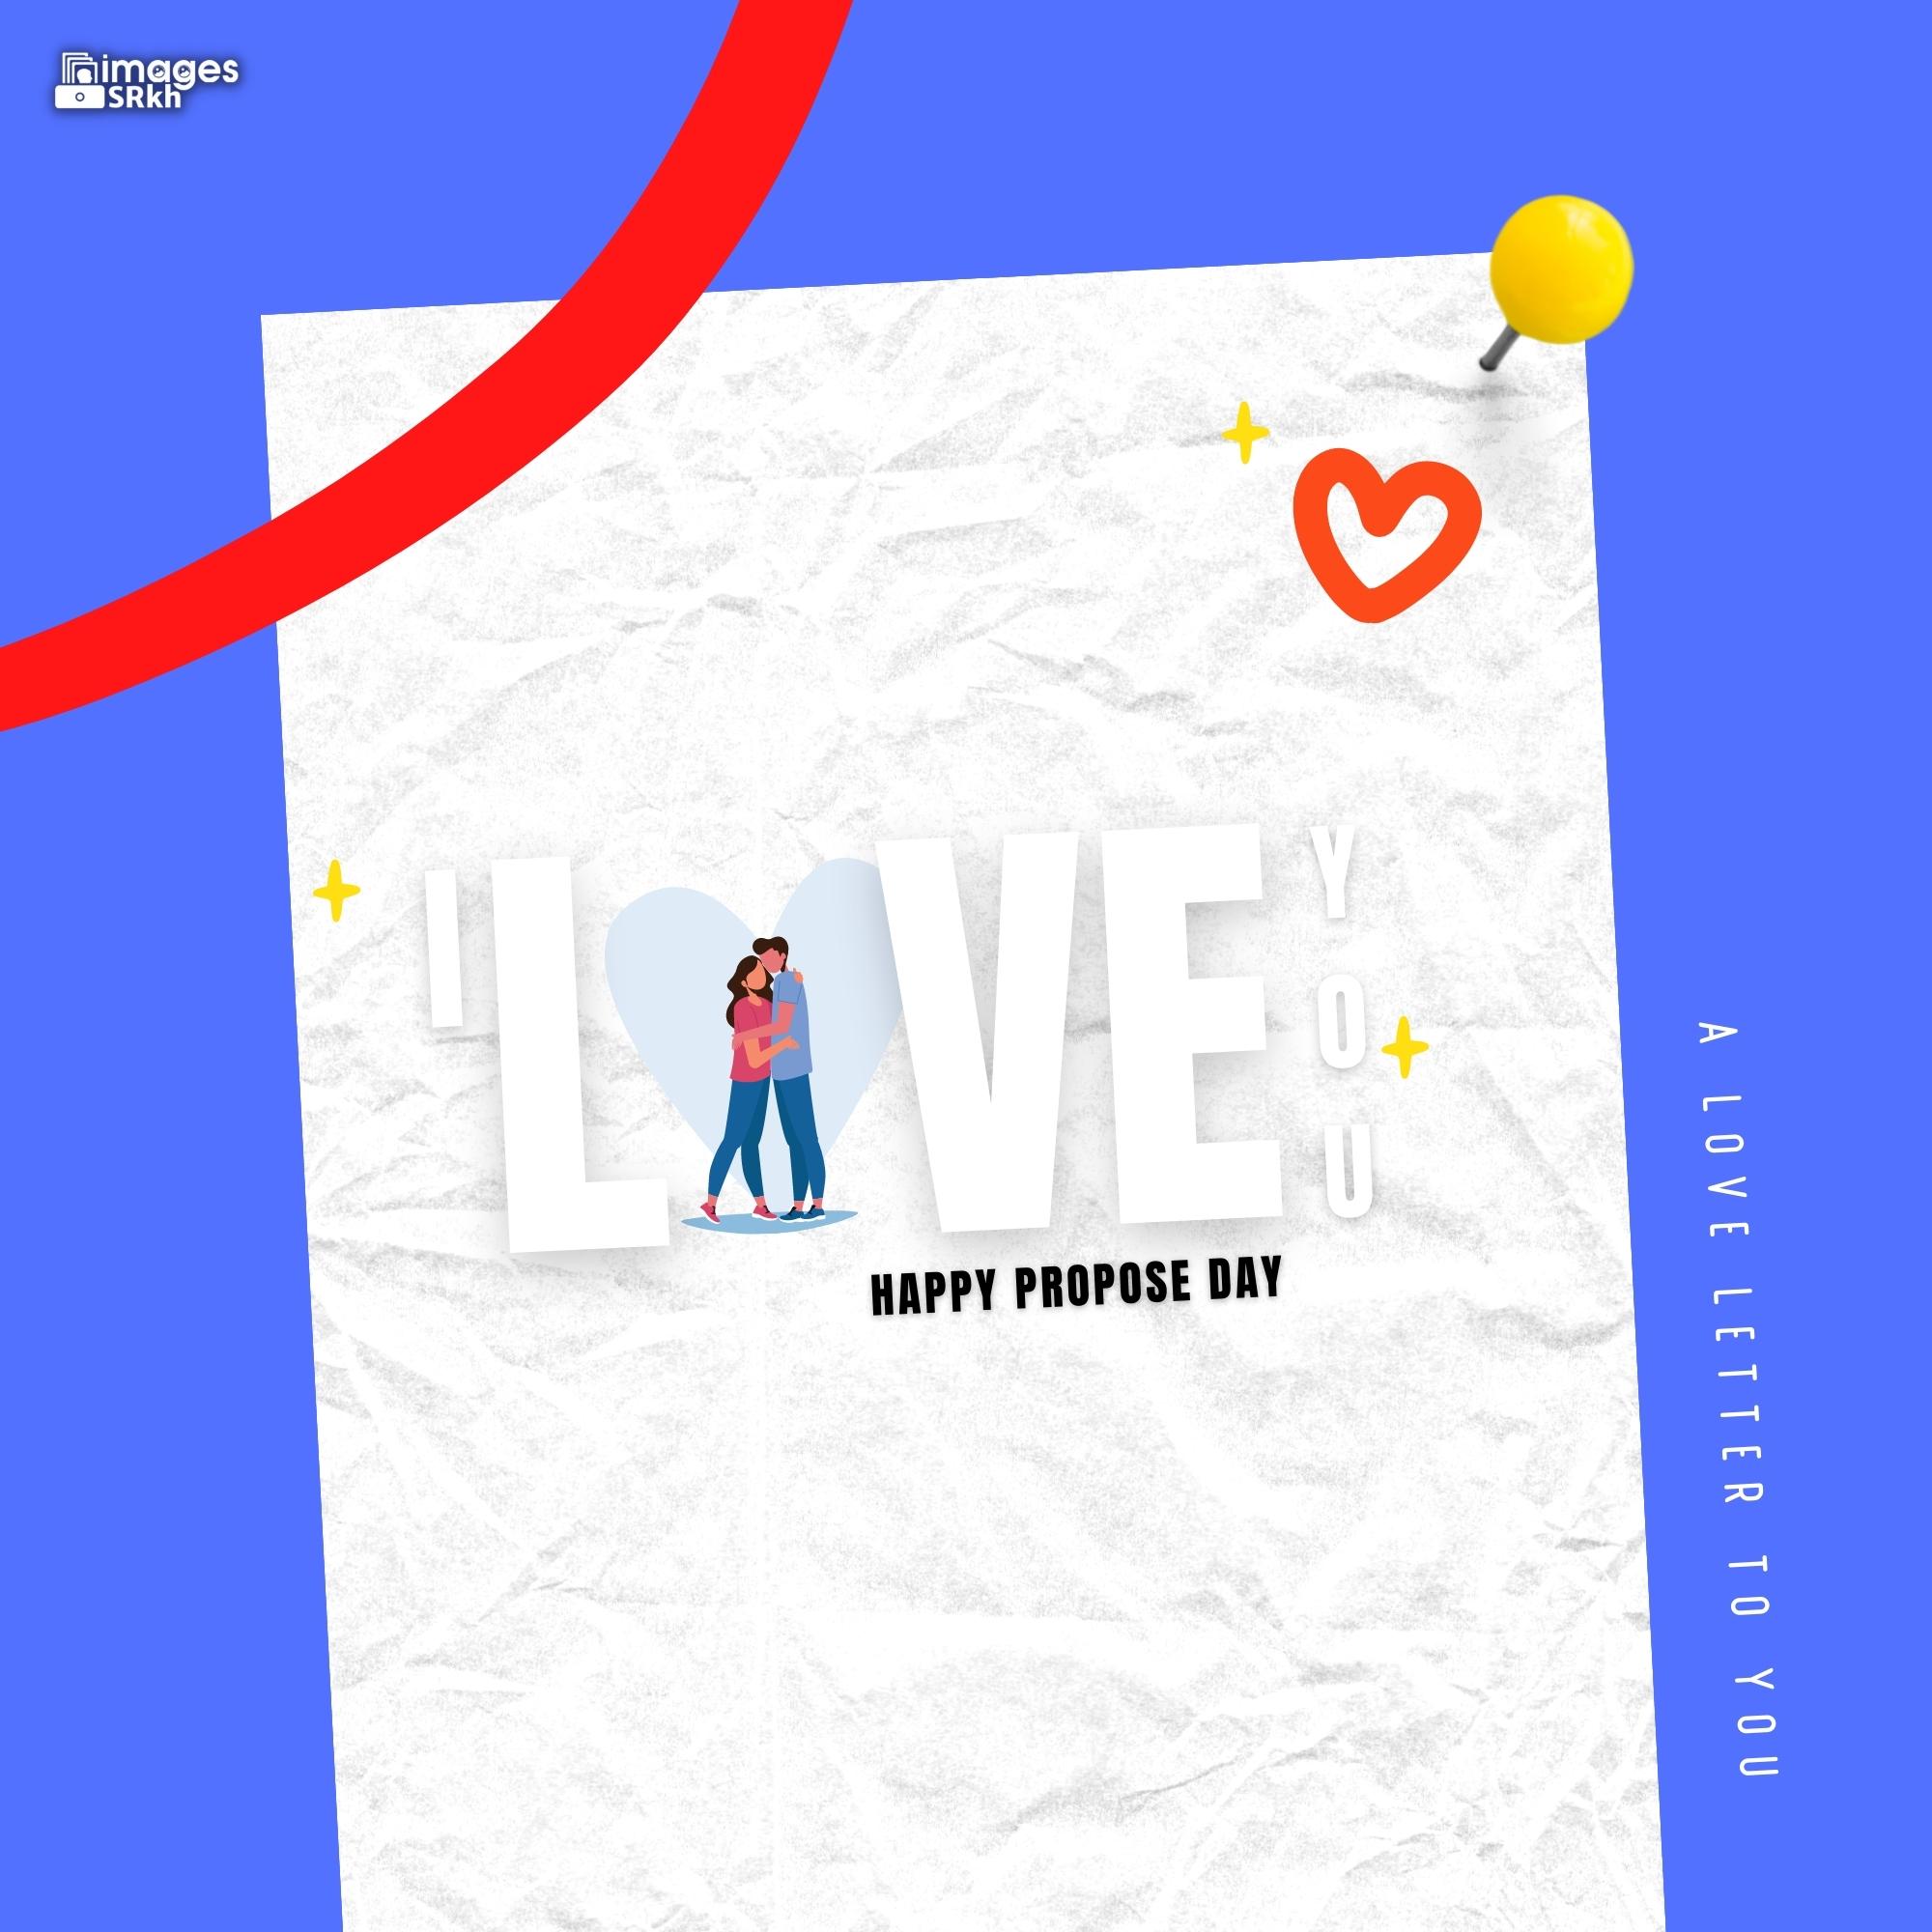 Happy Propose Day Images | 404 | I LOVE YOU